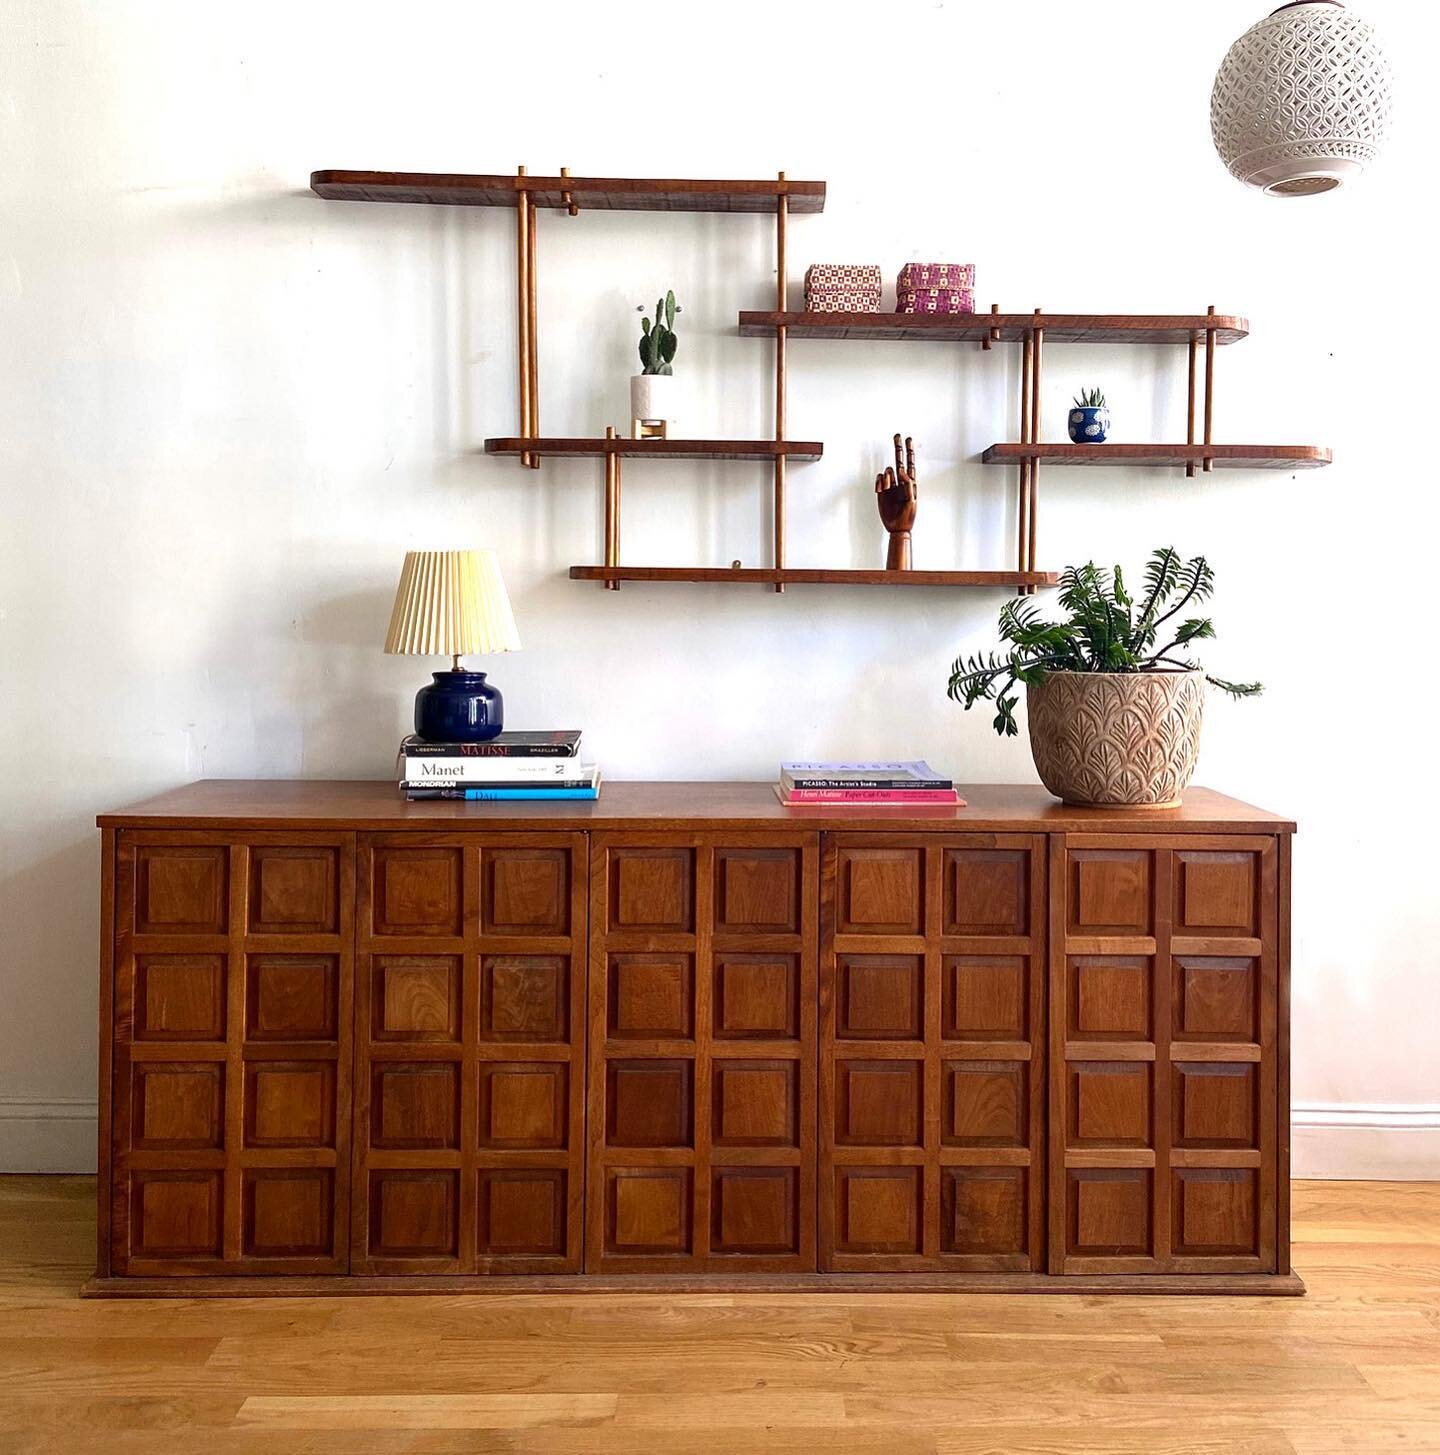 A really unique paneled midcentury credenza. Tons of storage in this guy. 

Credenza SOLD
Handmade Wall Shelf SOLD